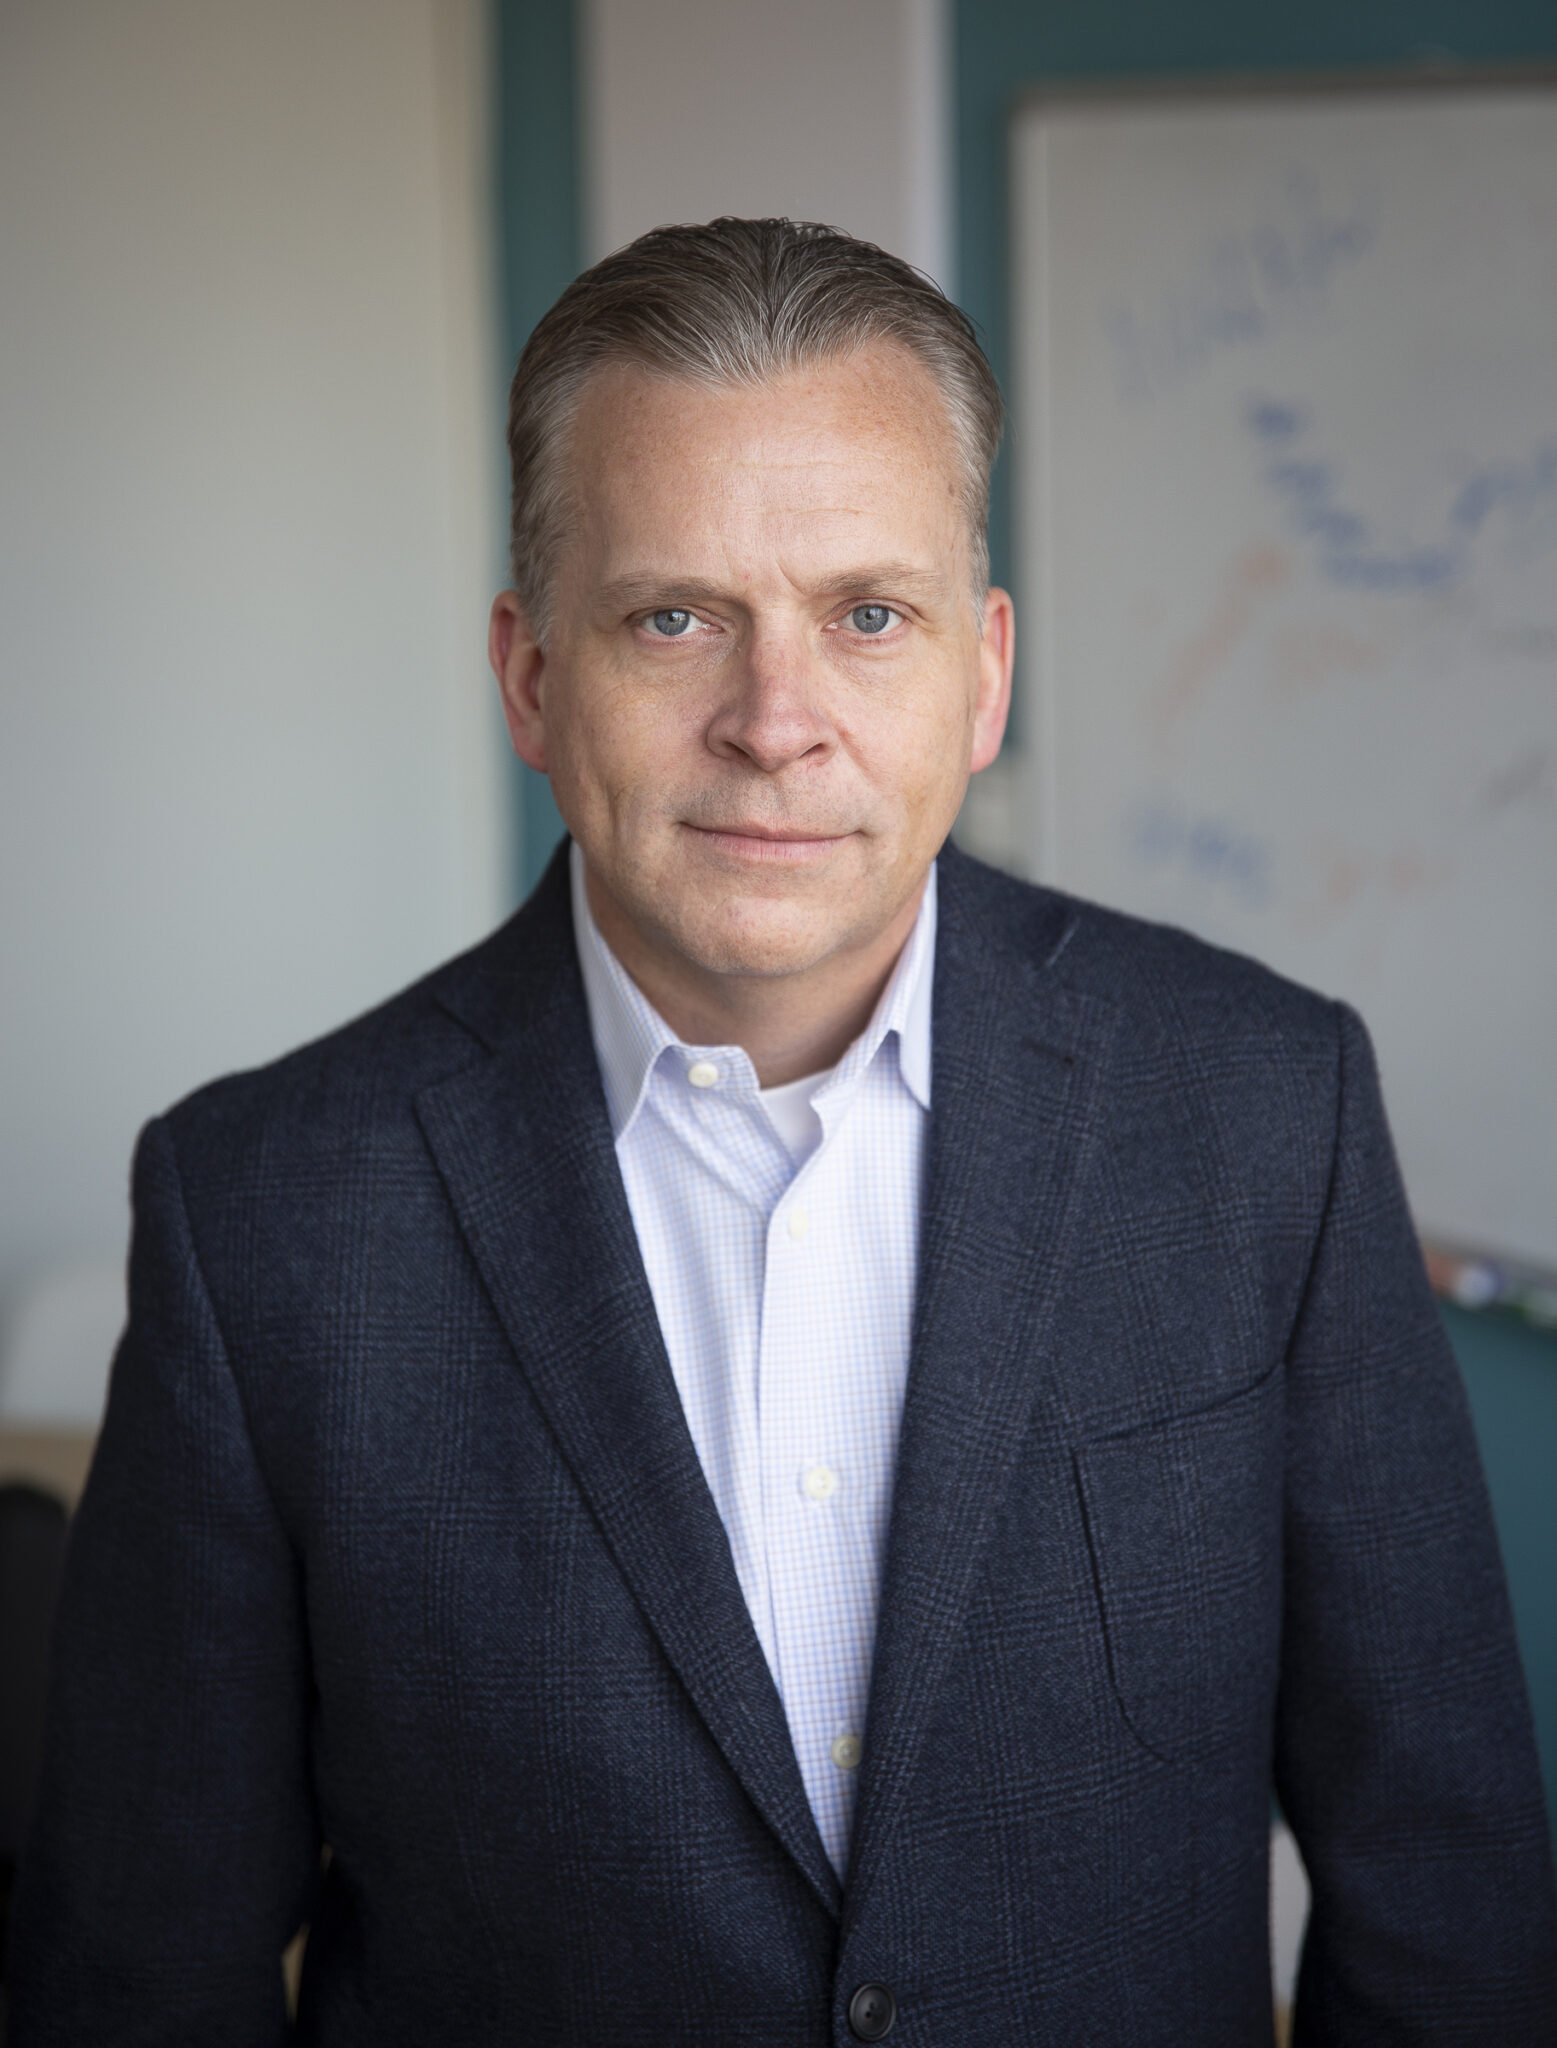 Frank Weishaupt, CEO bei Owl Labs